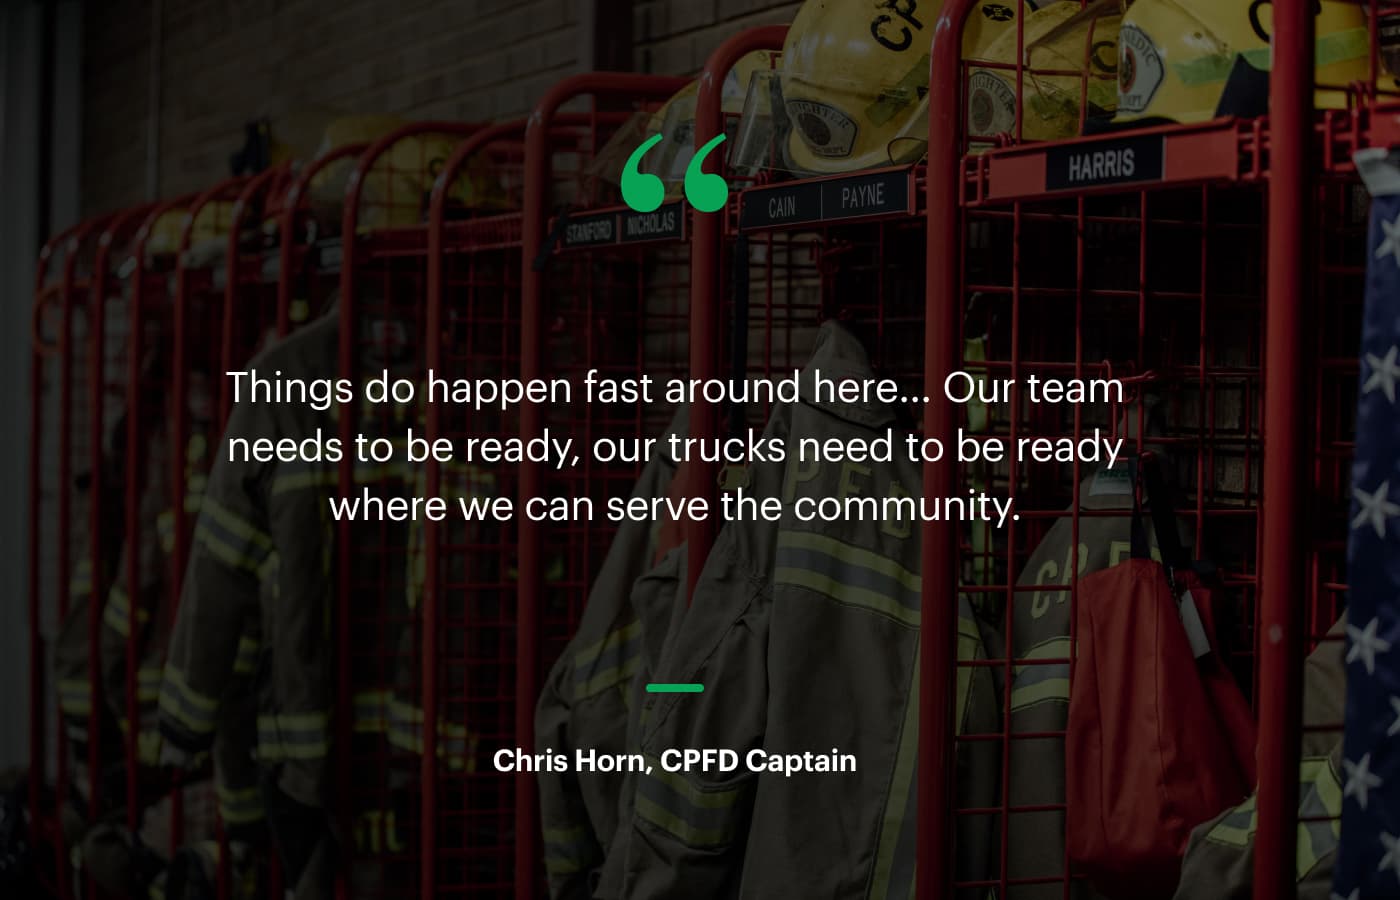 “Things do happen fast around here… Our team needs to be ready, our trucks need to be ready where we can serve the community.” – Chris Horn, CPFD Captain